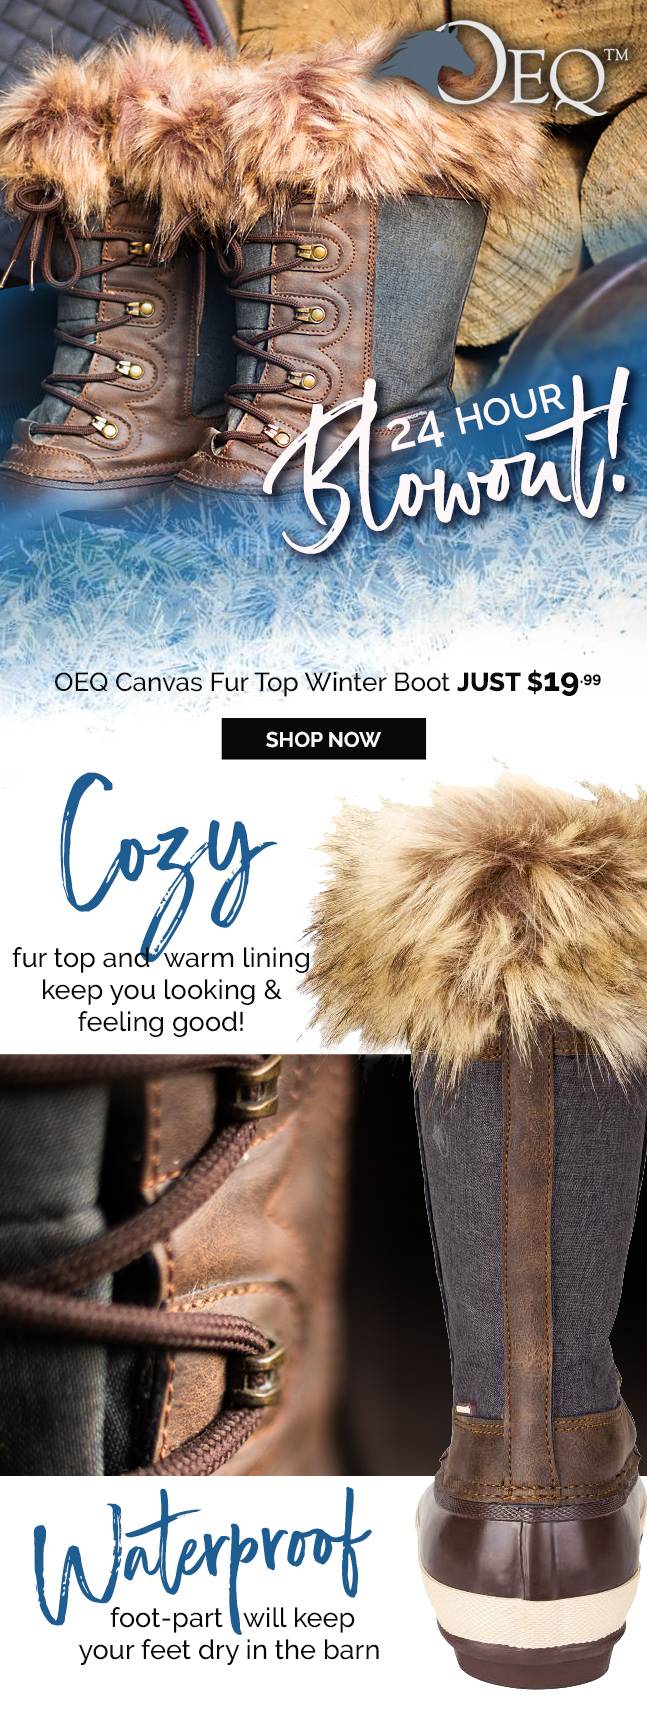 24-Hour Blowout! OEQ Canvas Fur Top Winter Boot JUST $19.99 - Save 70% OFF